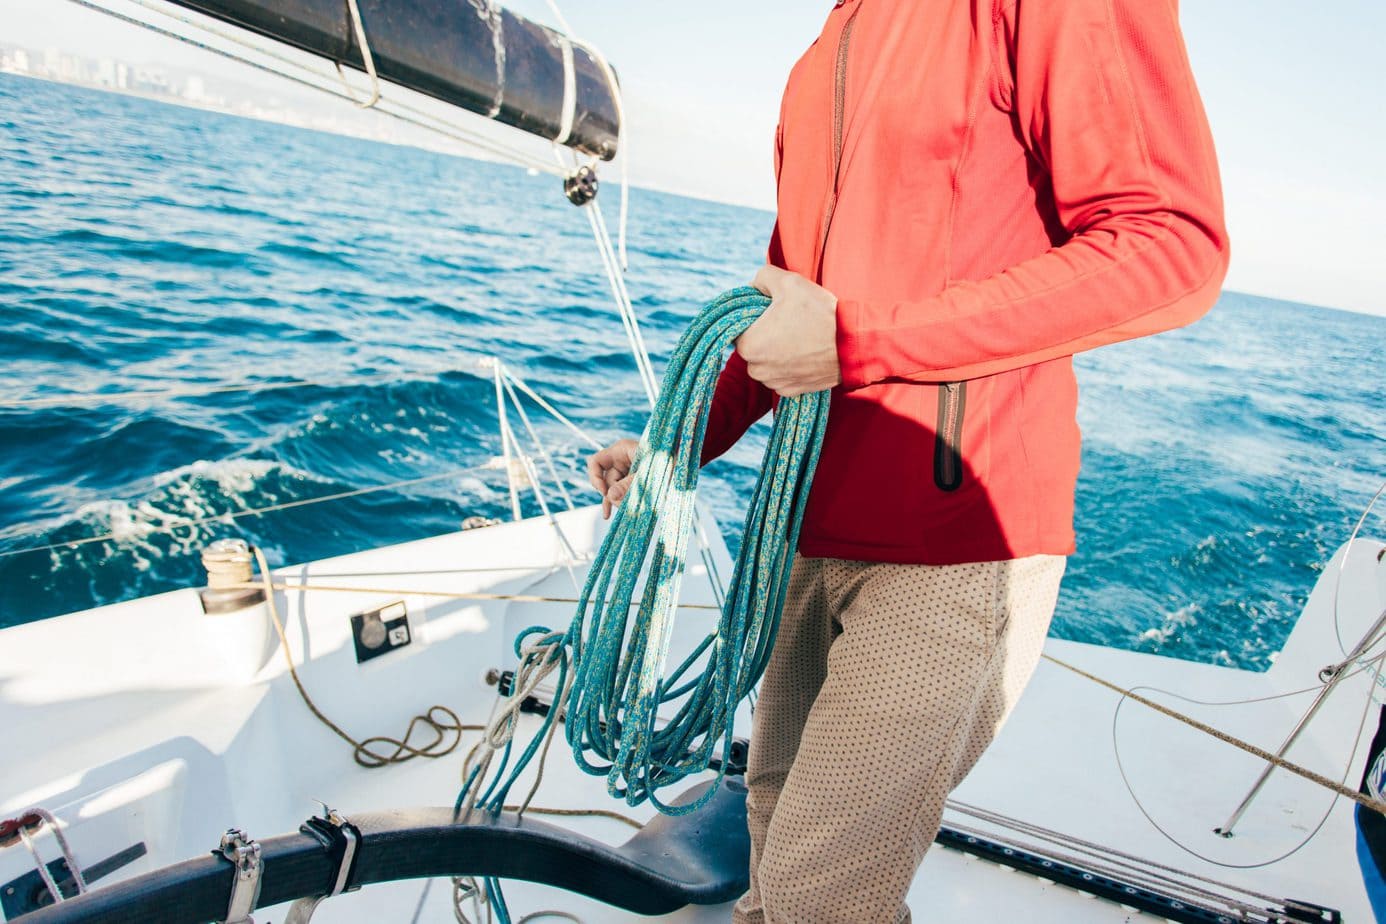 Basic sailing equipment and accessories – don’t go on a cruise without it!